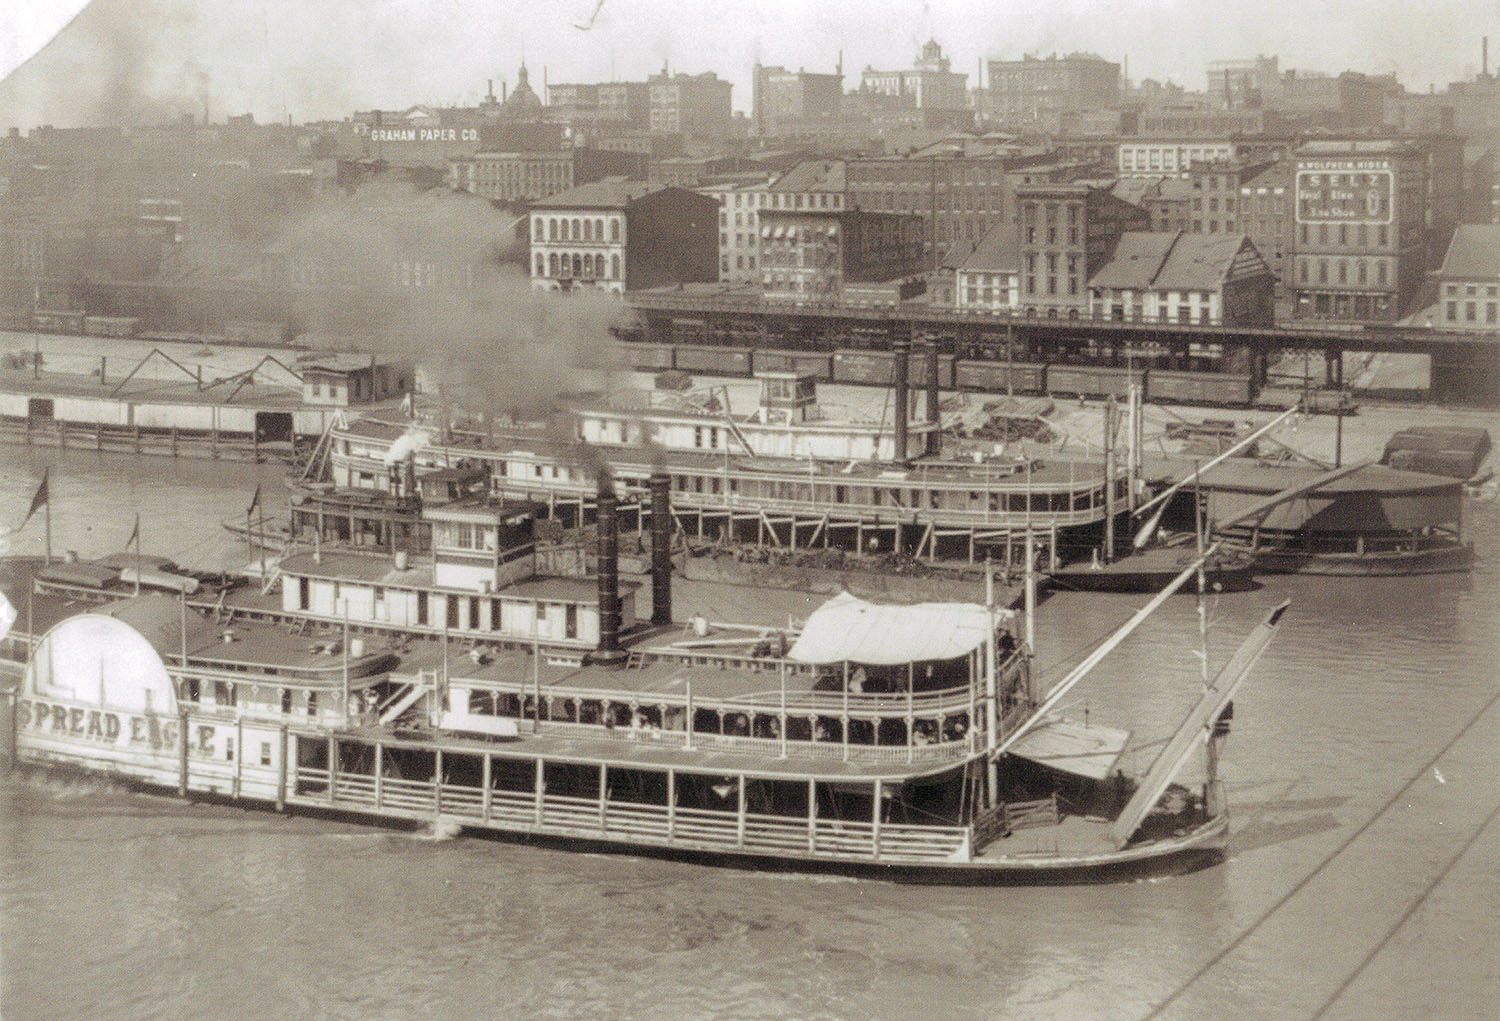 The steamers Spread Eagle and Dubuque at the St. Louis waterfront. (Keith Norrington collection)